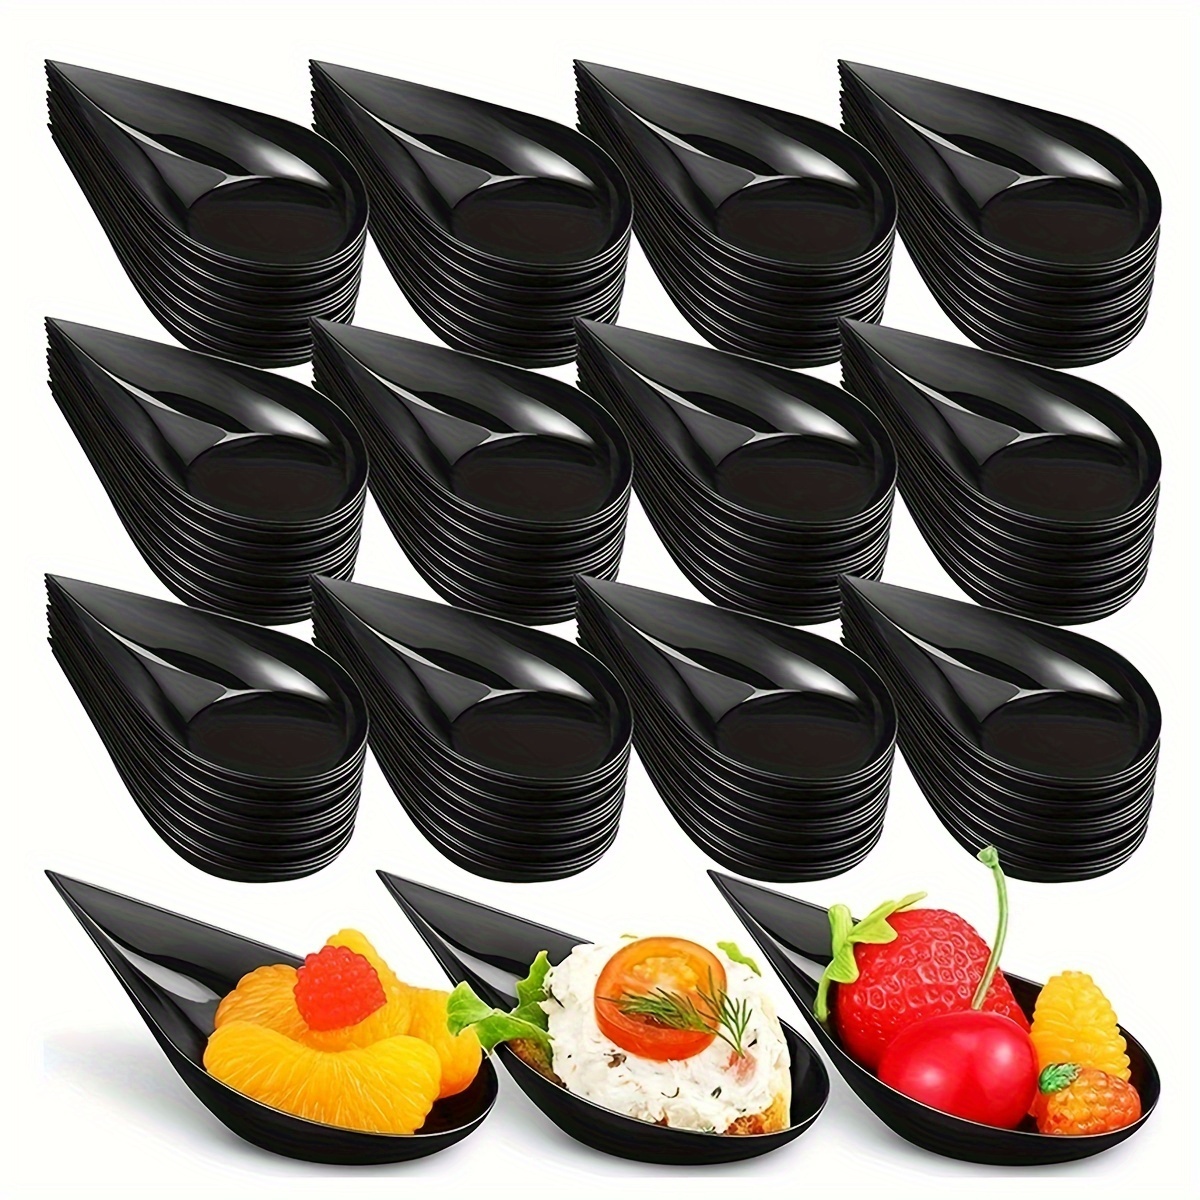 

10pcs Mini Sushi Dessert Spoon Plate, Mini Pudding Fruit Dish, Cake Spoon, Dessert Display Tray, For Wedding Party Dinner, Party Supplies, Tableware Accessories, 3.94in*1.97in